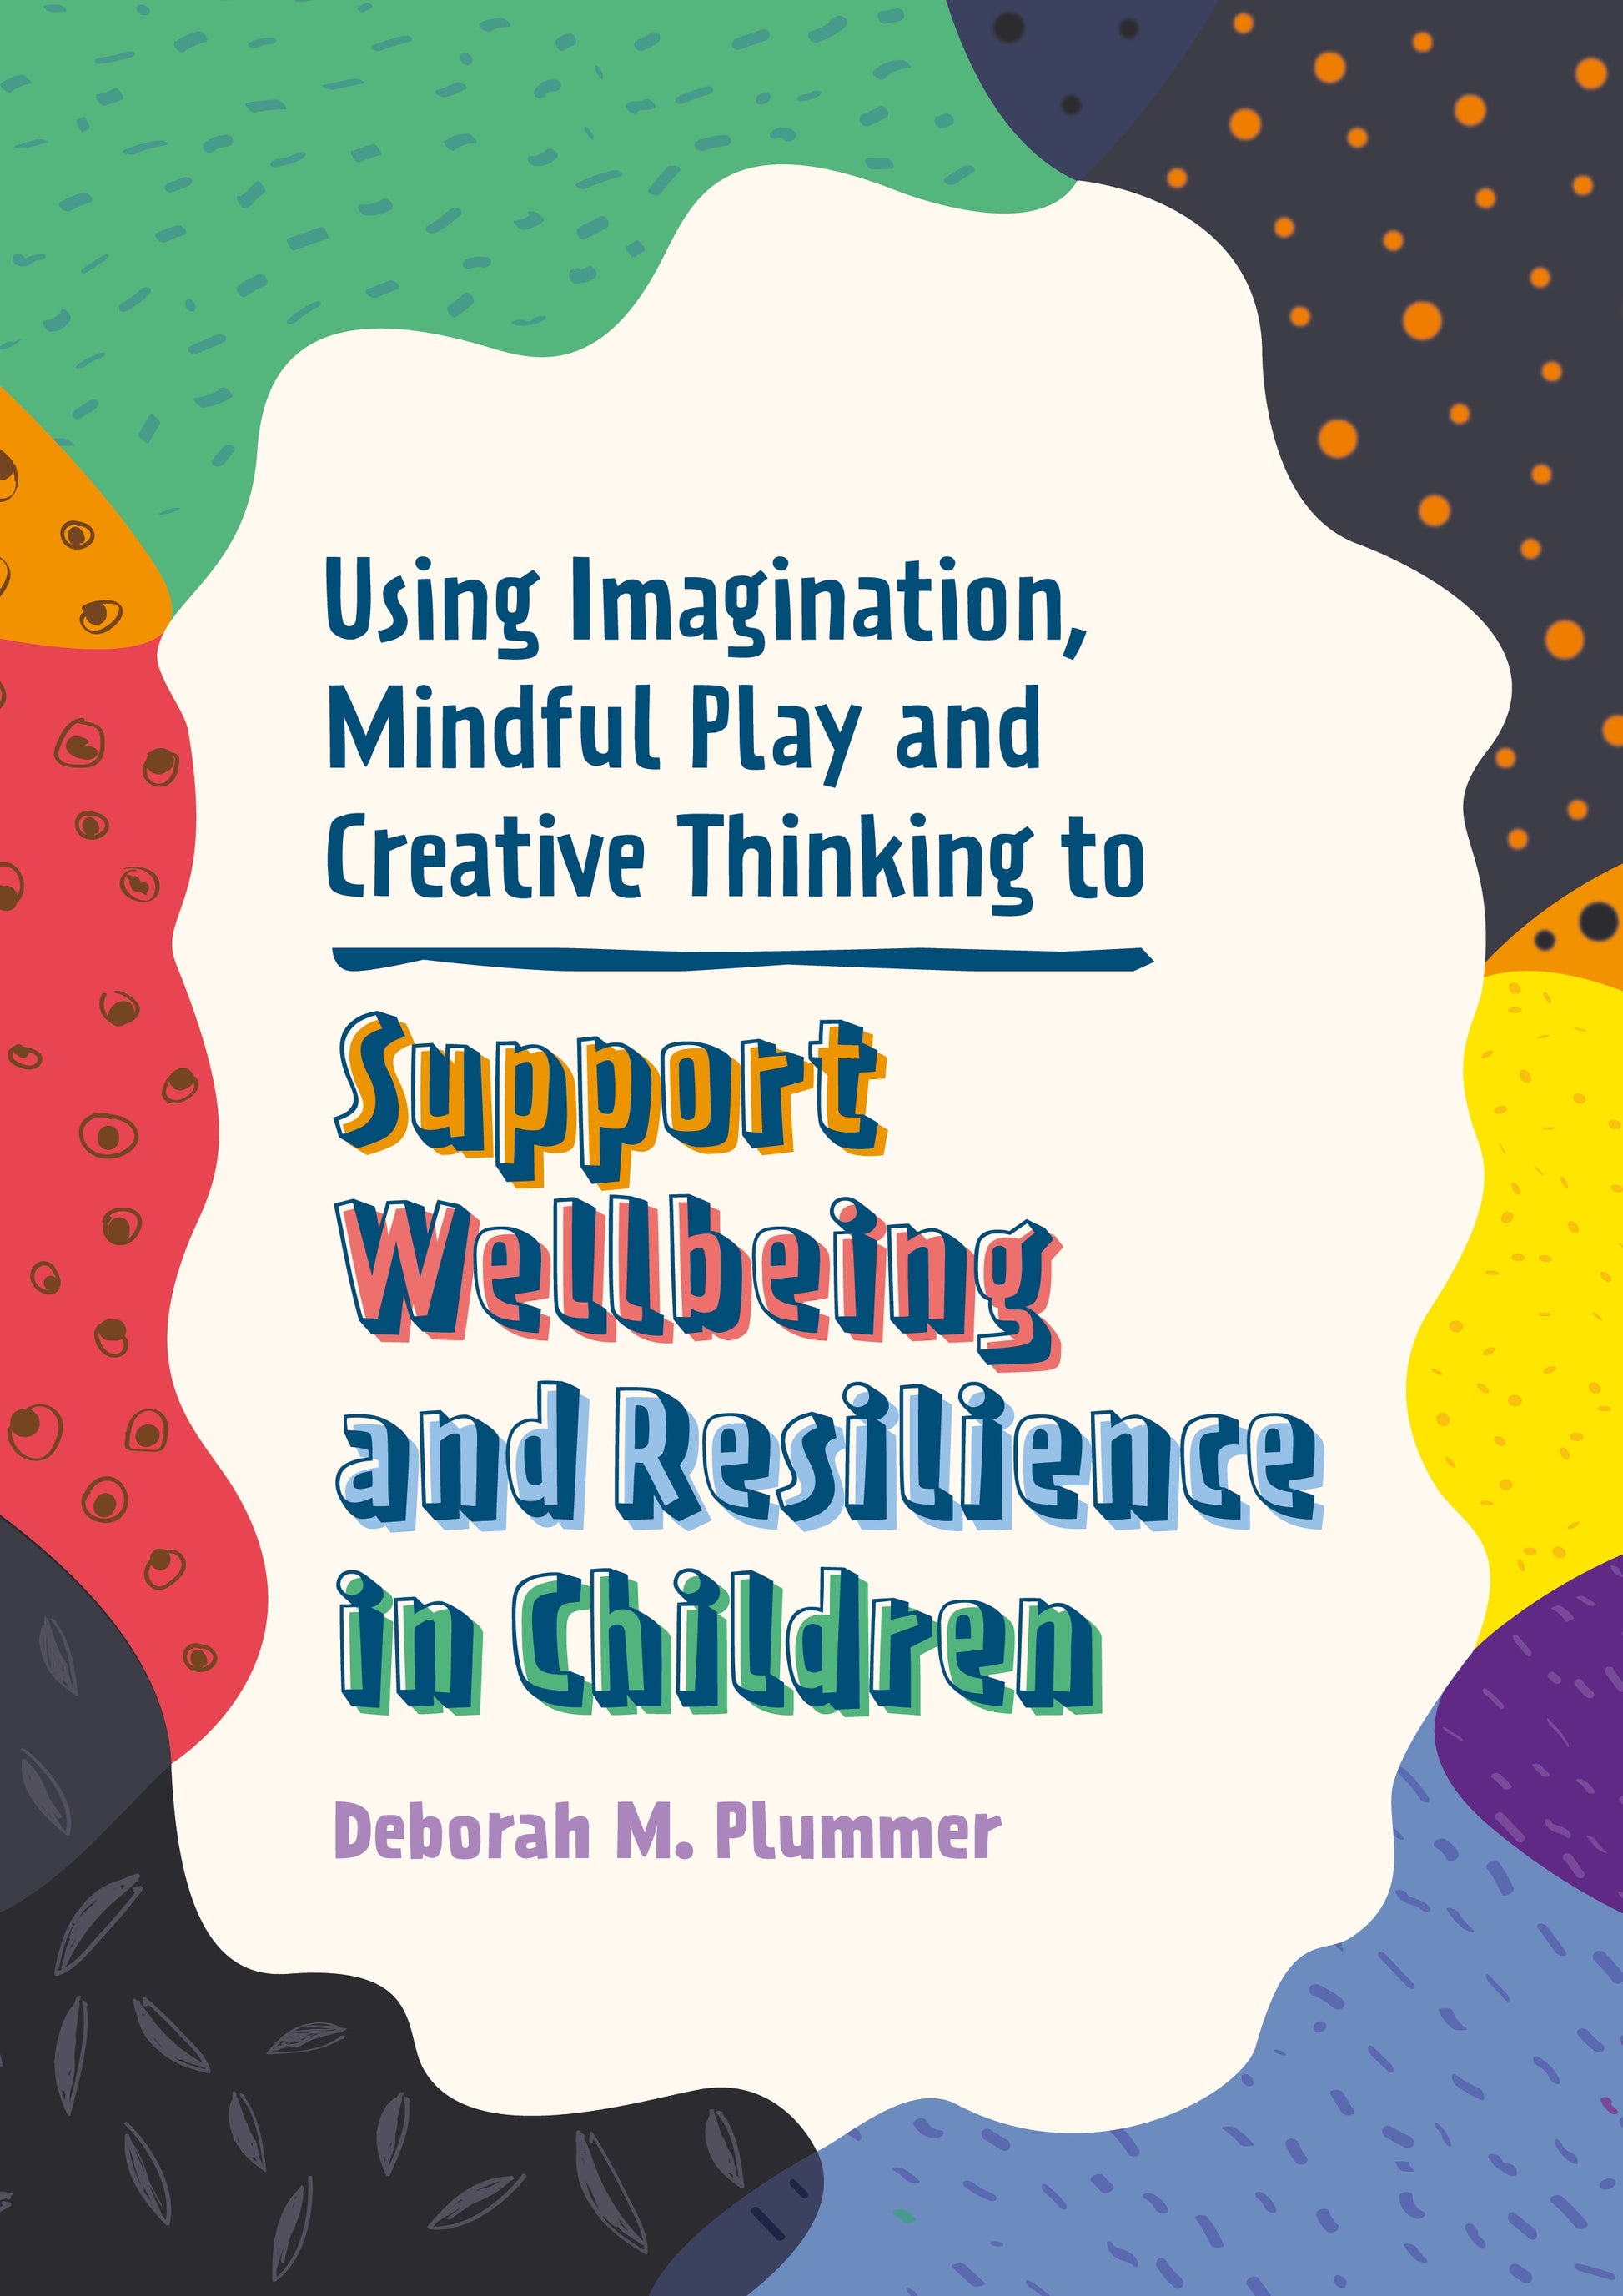 Using Imagination, Mindful Play and Creative Thinking to Support Wellbeing and Resilience in Children by Deborah Plummer, Alice Harper